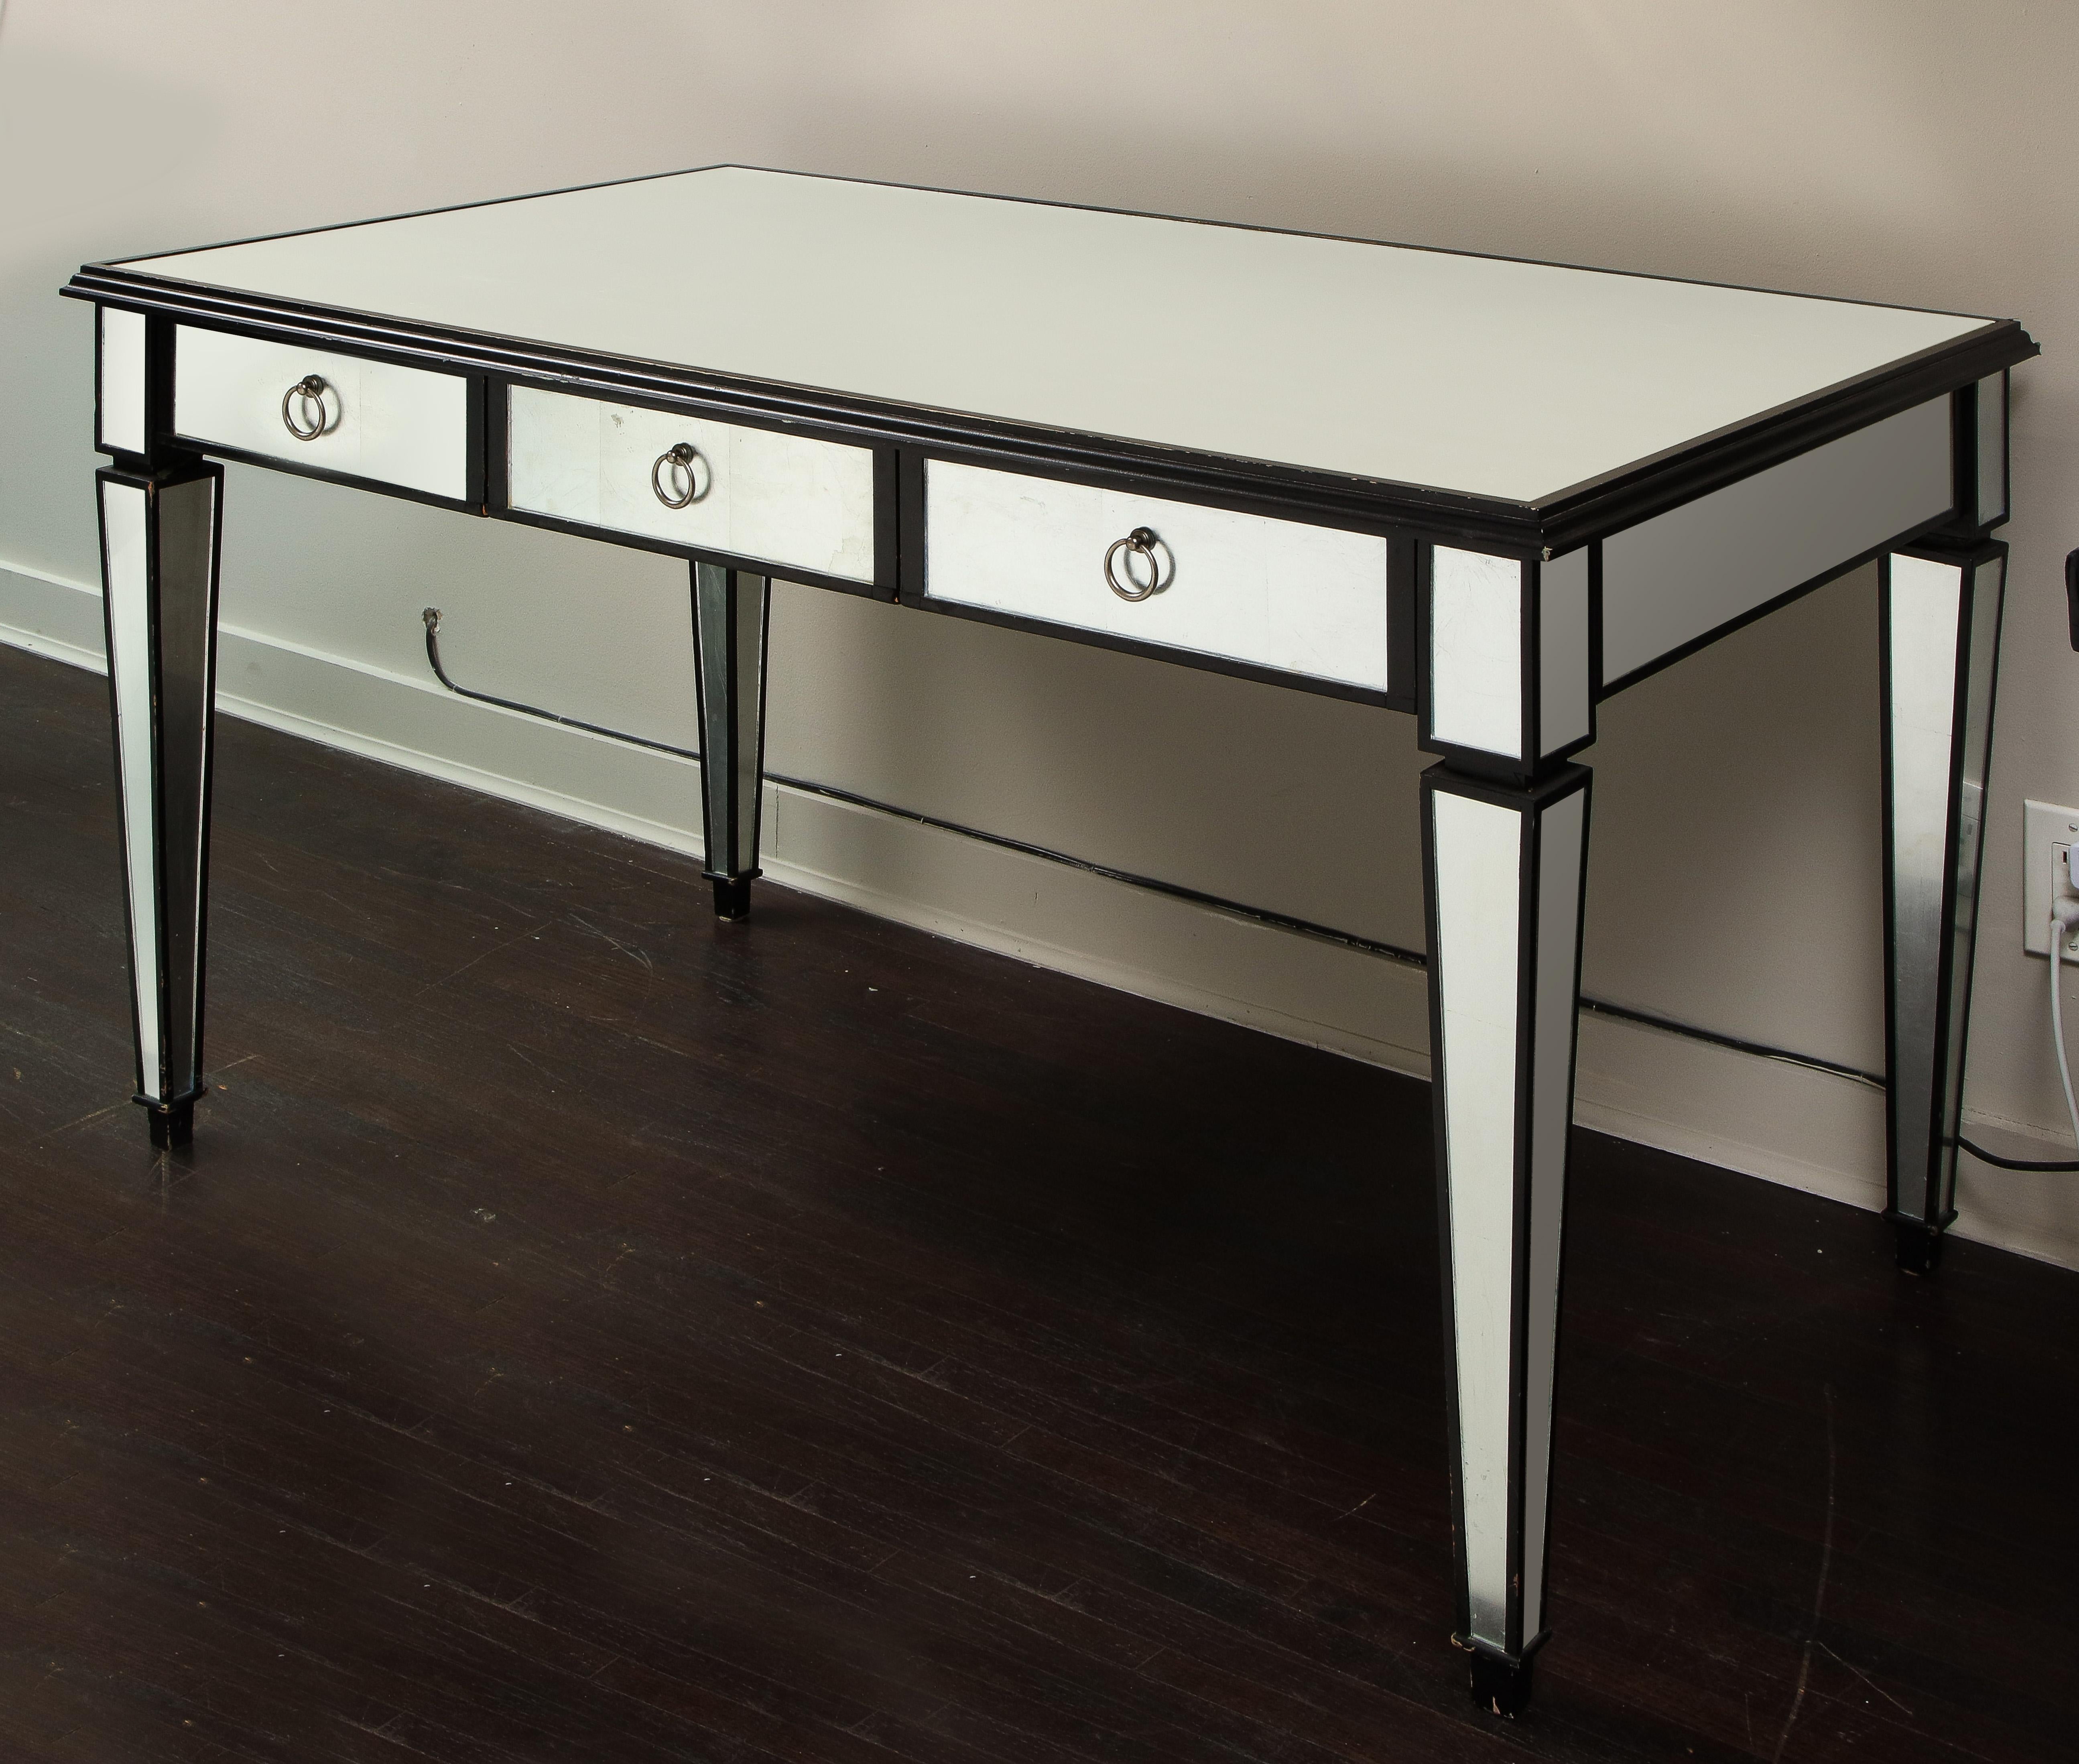 Floor model of reverse silver leaf glass desk with black lacquer trim. A perfect modern transitional style desk in a monochromatic tone. The desk shows some wear on trims and minor silvering. Touch-ups on the trims will be done upon purchase.